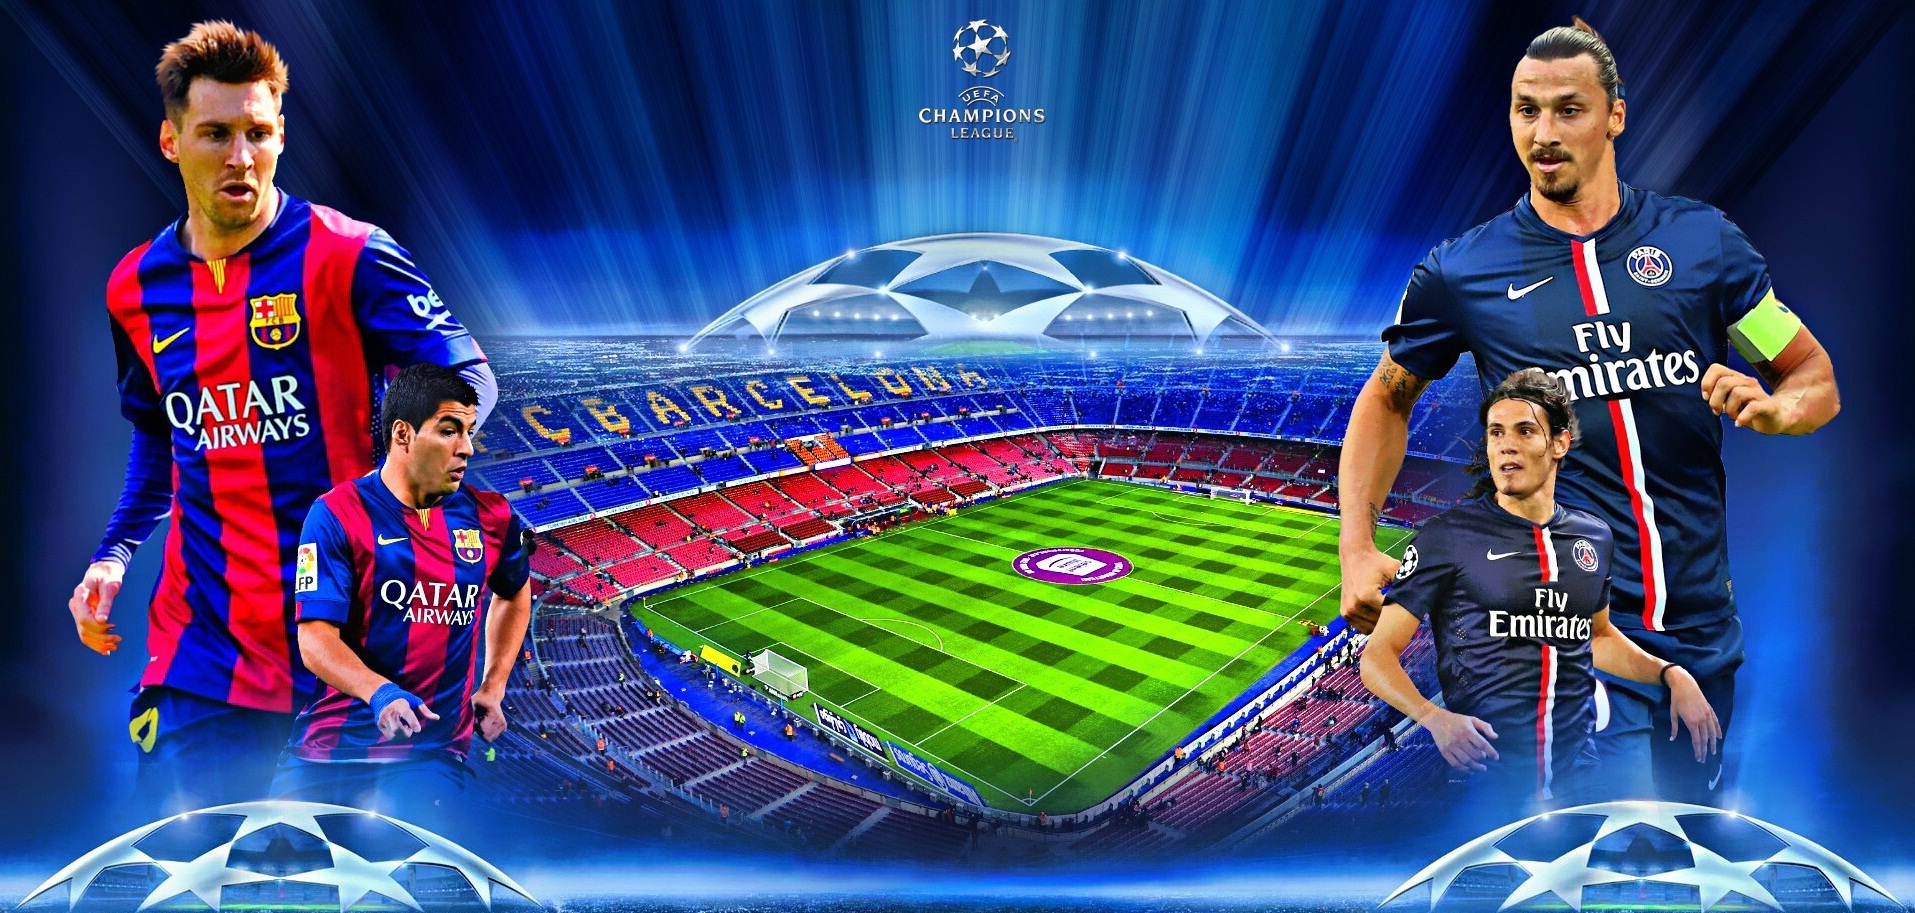 UEFA Champions League Wallpapers